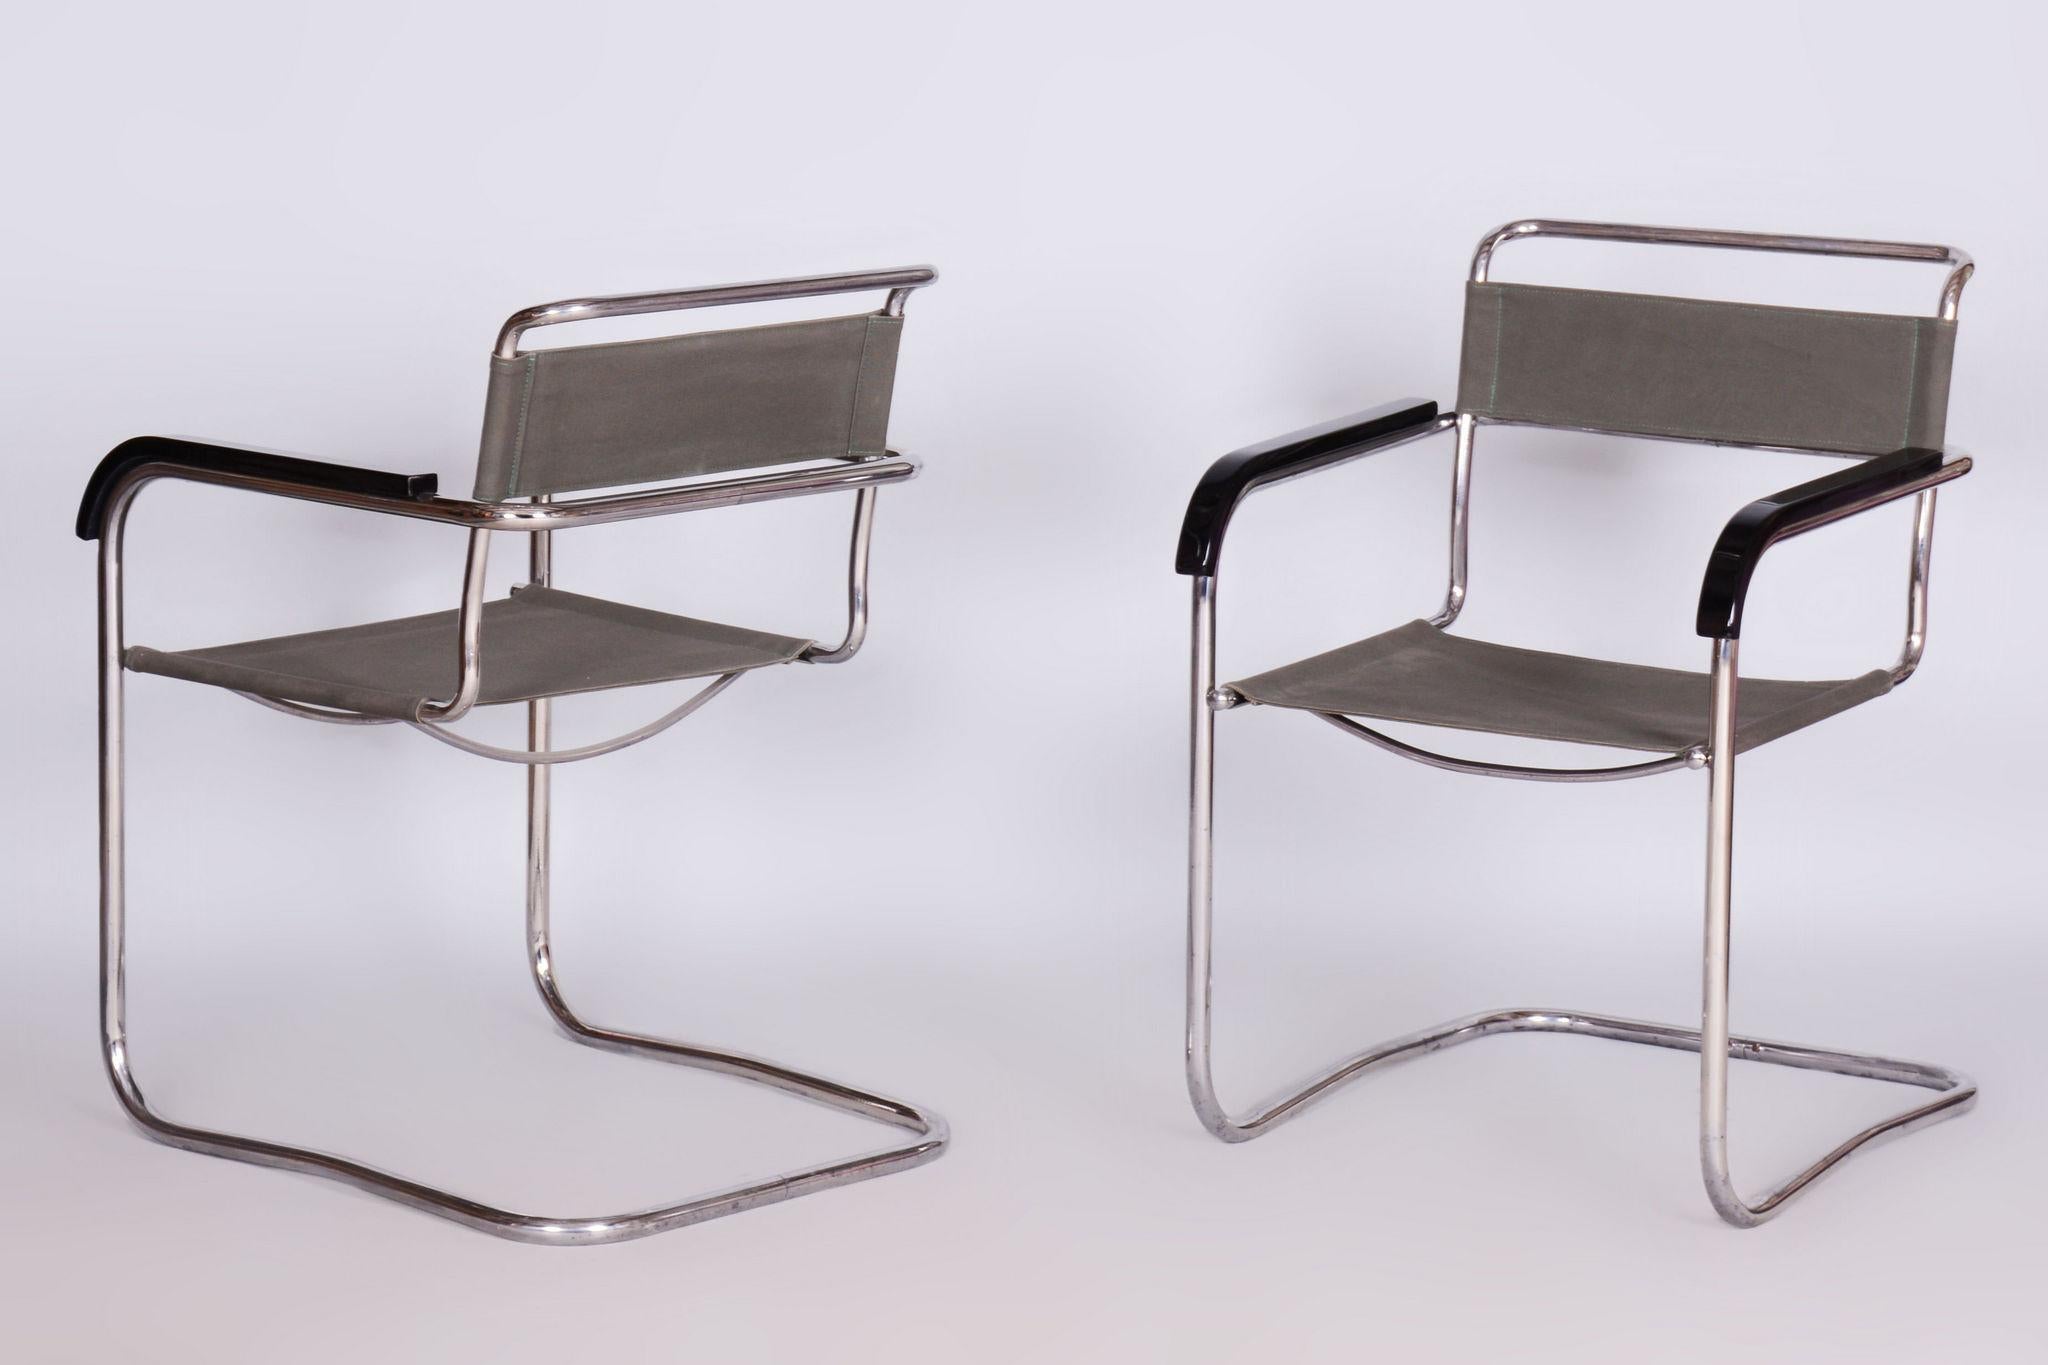 Steel Restored Bauhaus Pair of Armchairs, by Thonet, by Marcel Breuer, Czech, 1930s For Sale